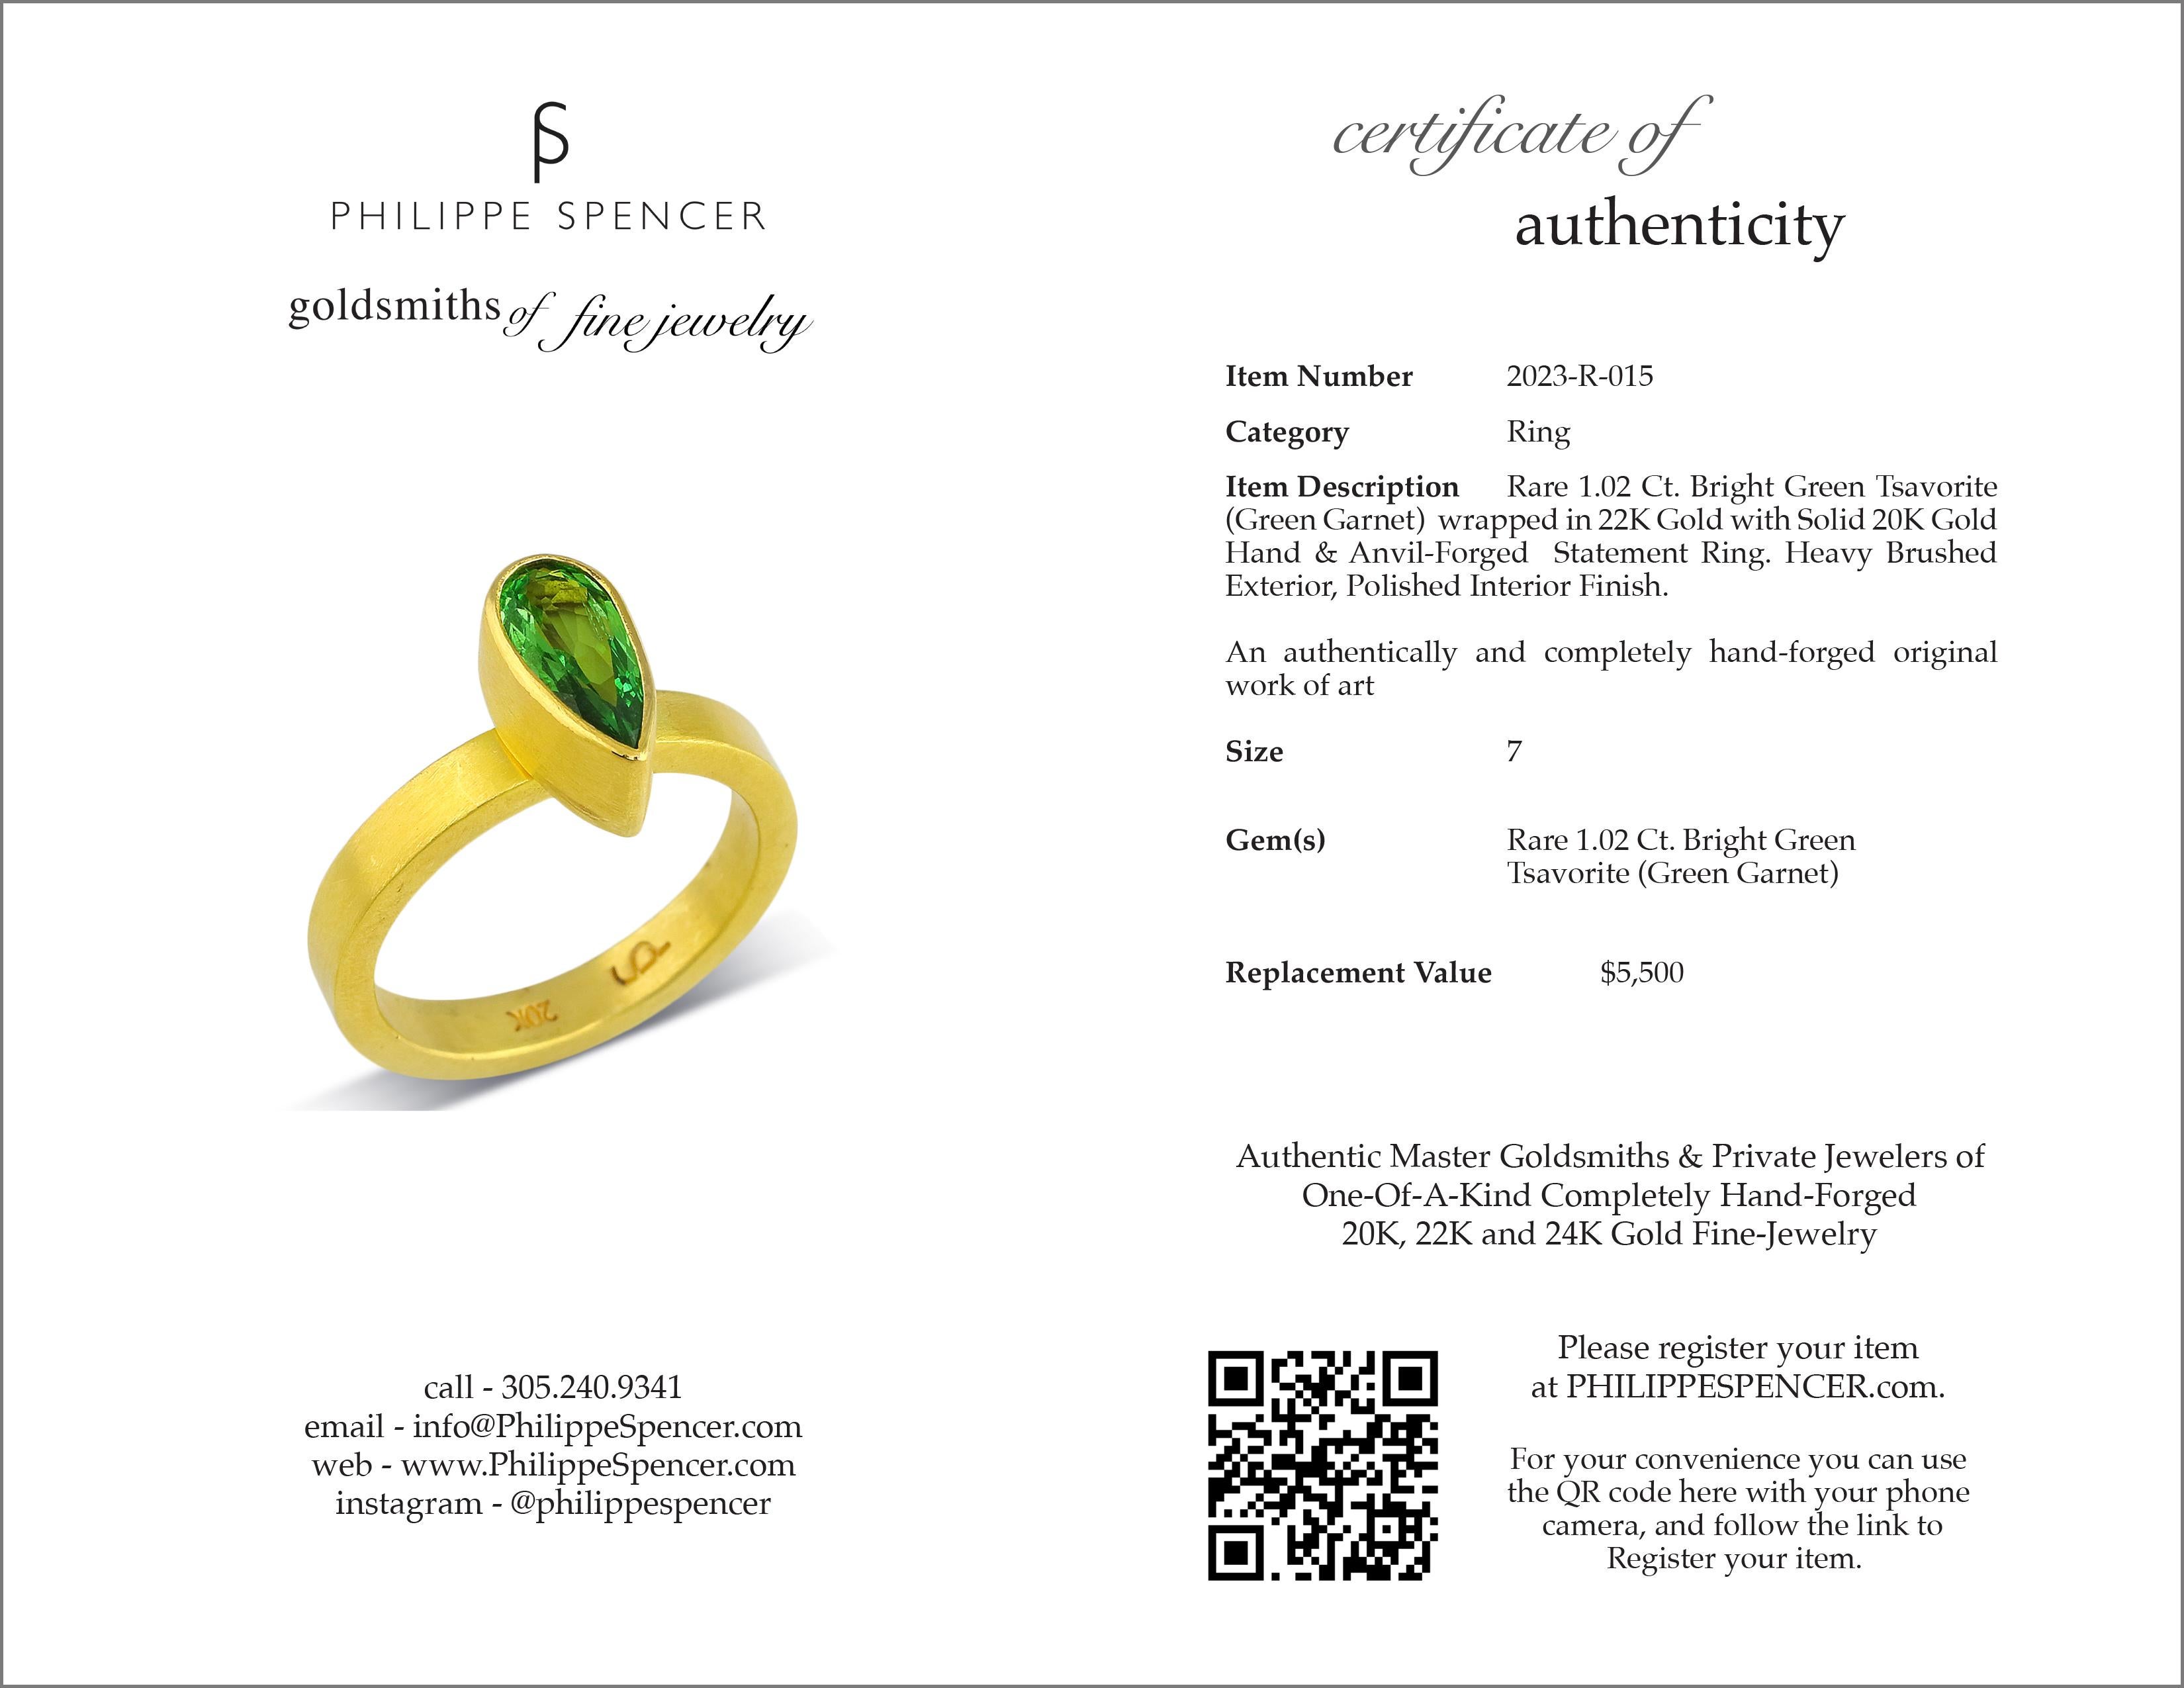 Pear Cut PHILIPPE SPENCER 1.02 Ct. Rare Tsavorite in 22K and 20K Gold Statement Ring For Sale